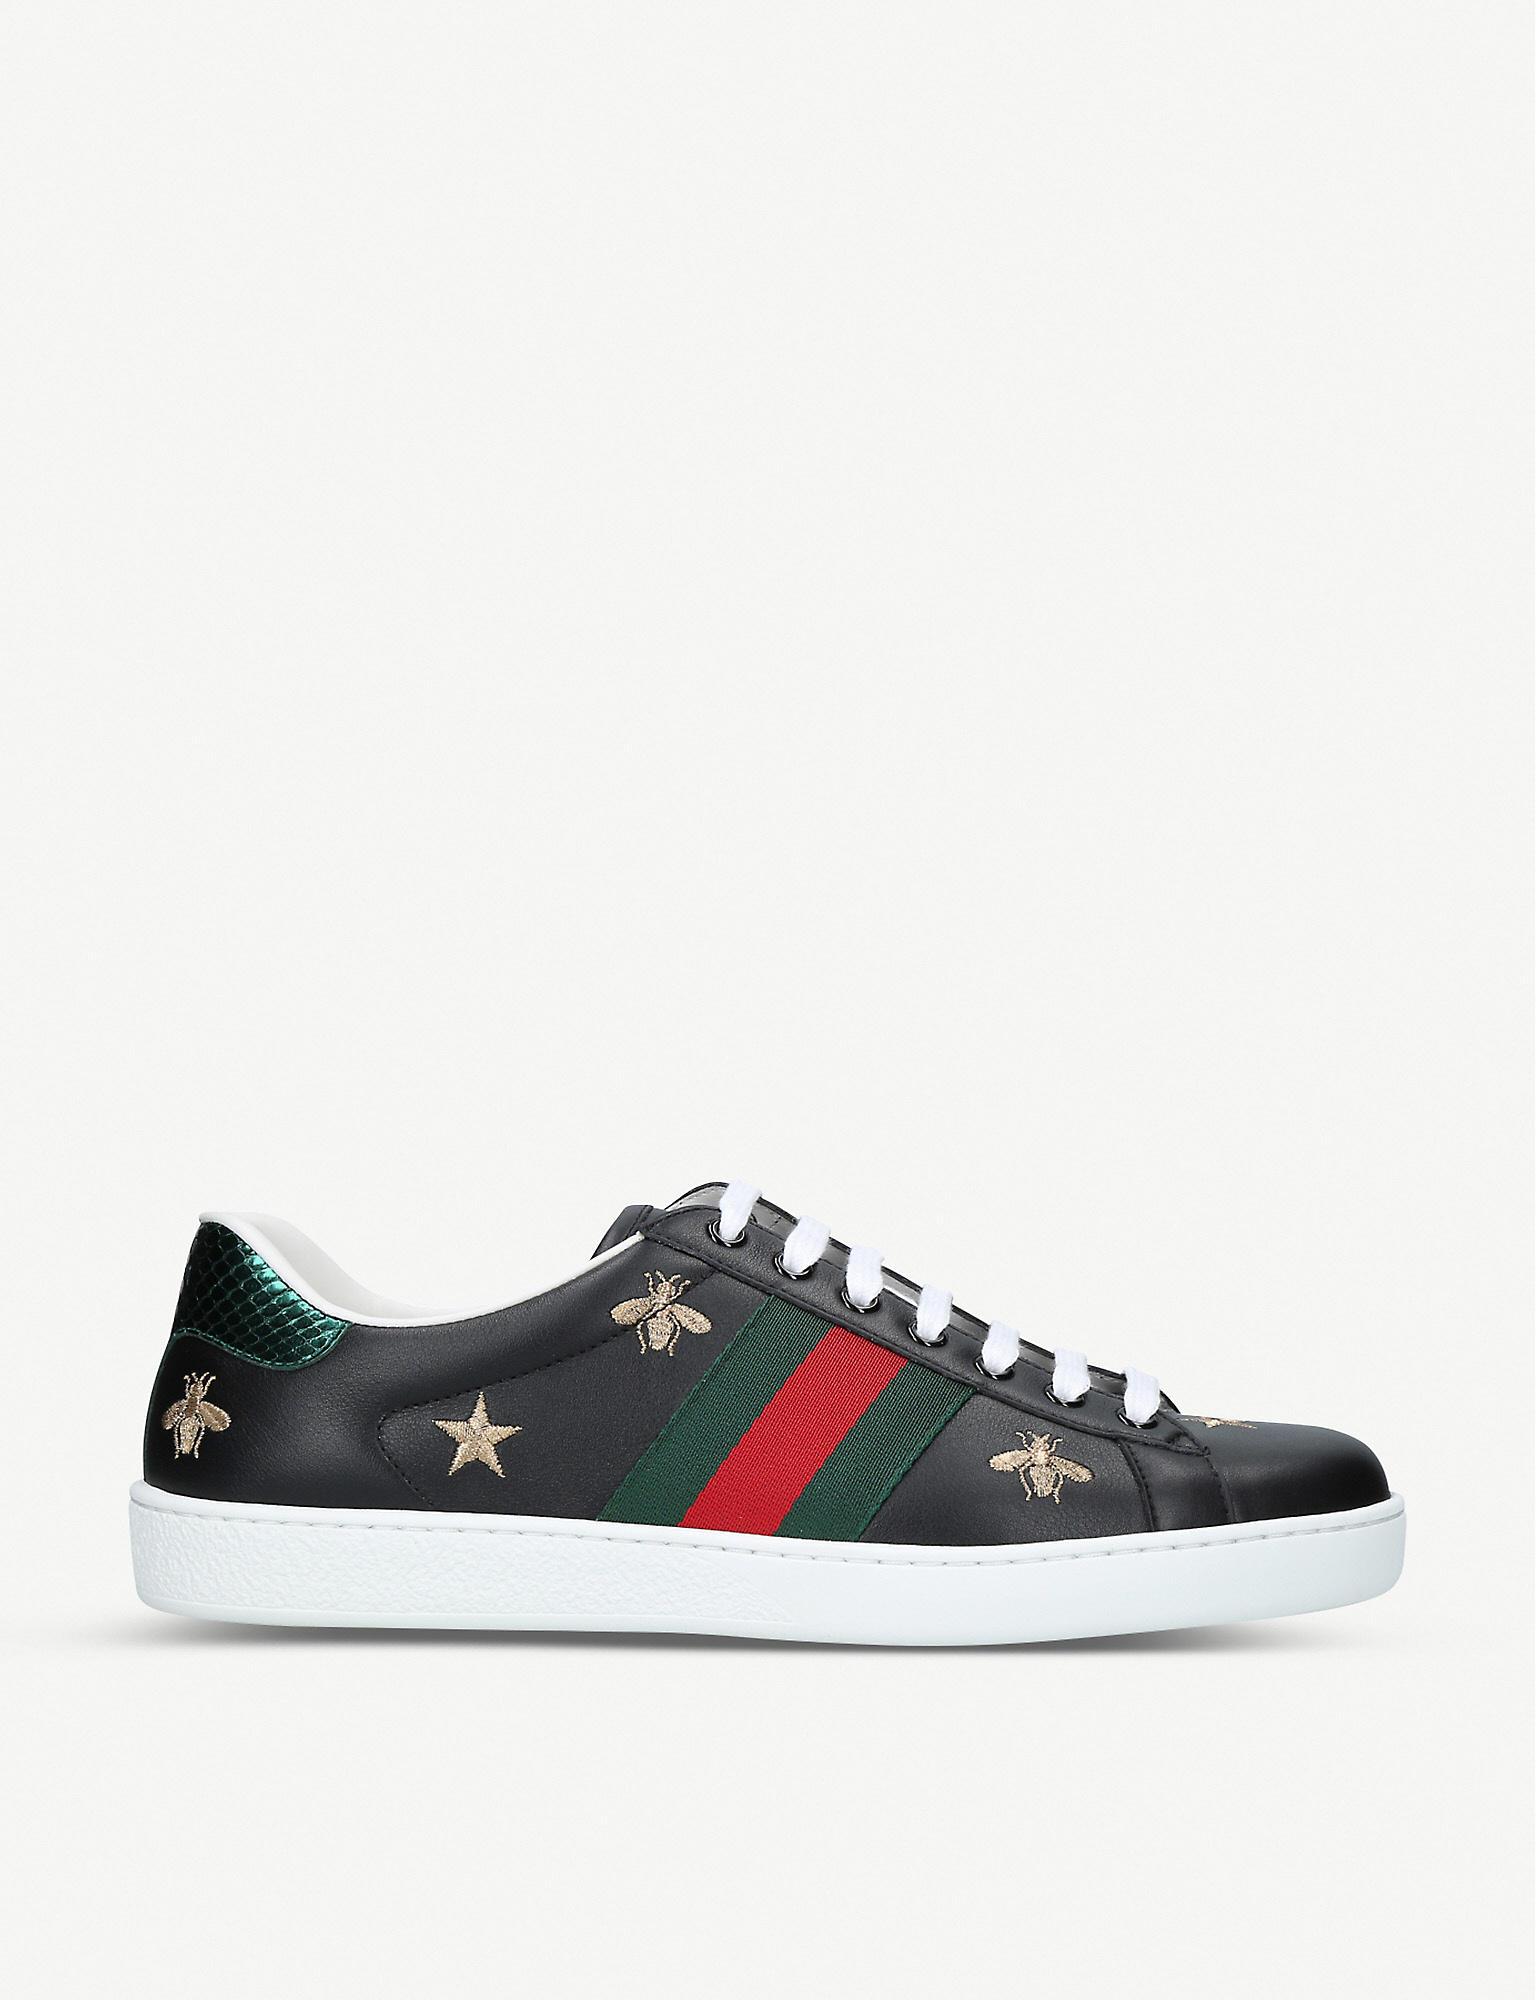 Gucci Bee Print Ace Sneaker in Black for Men